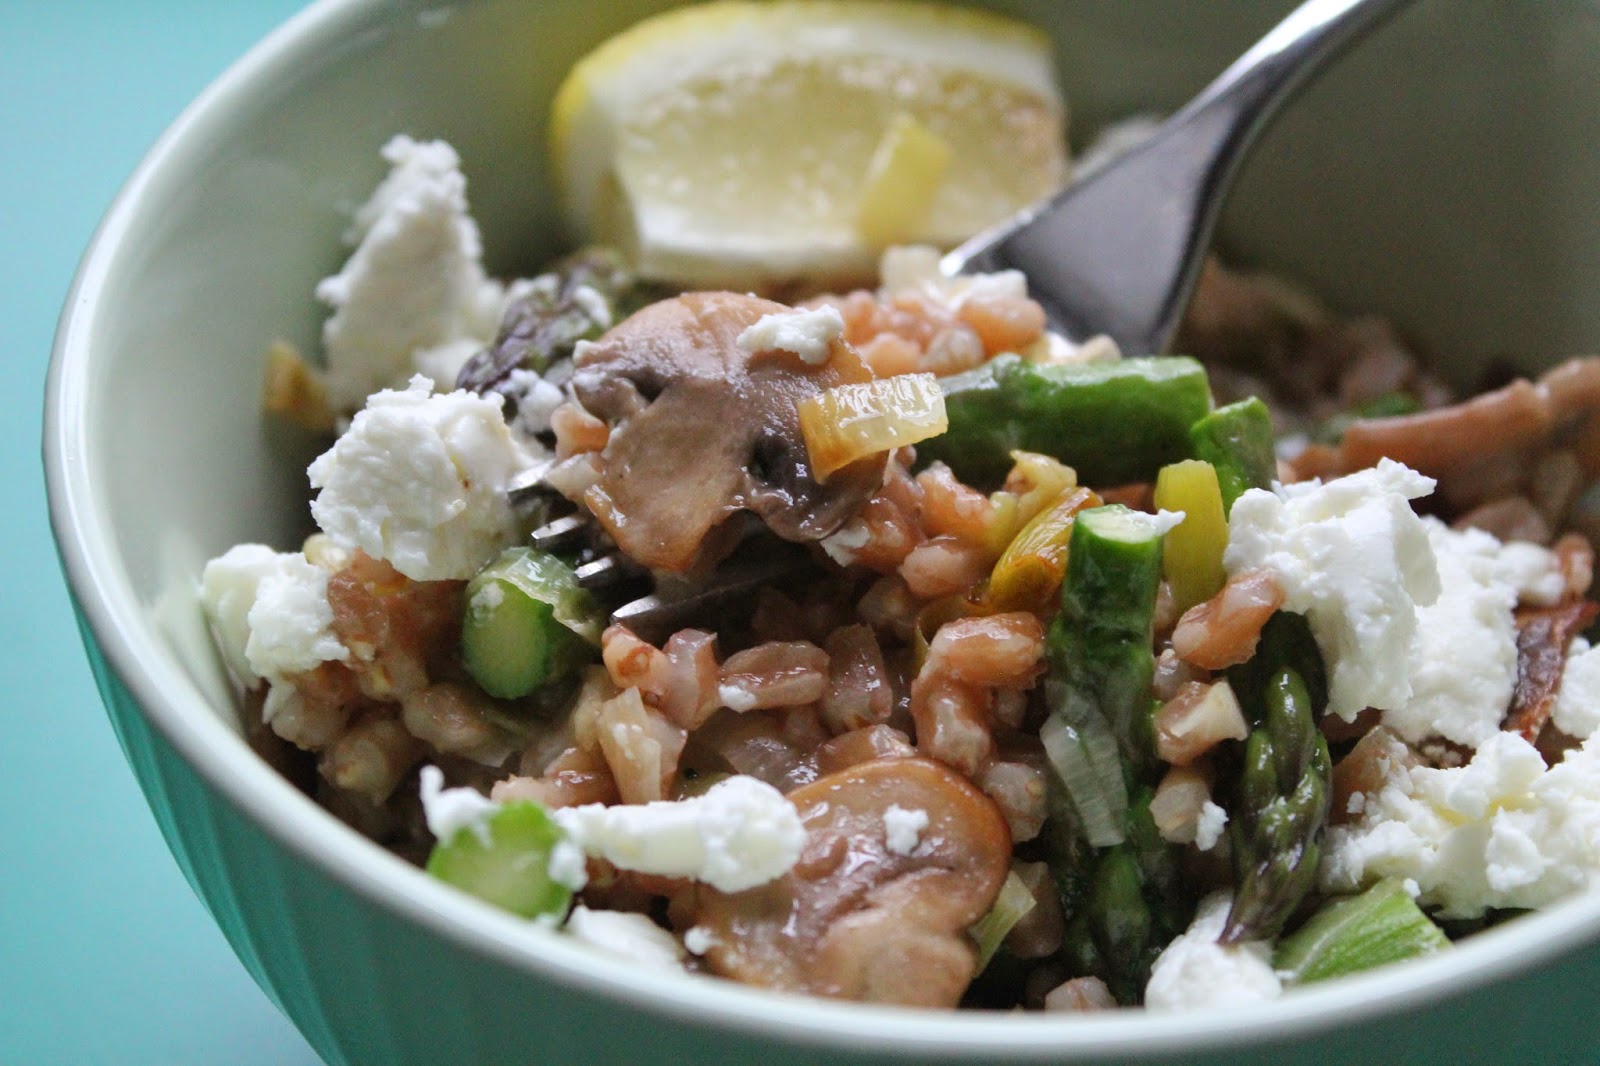 Farro "risotto" with mushrooms, asparagus, and goat cheese